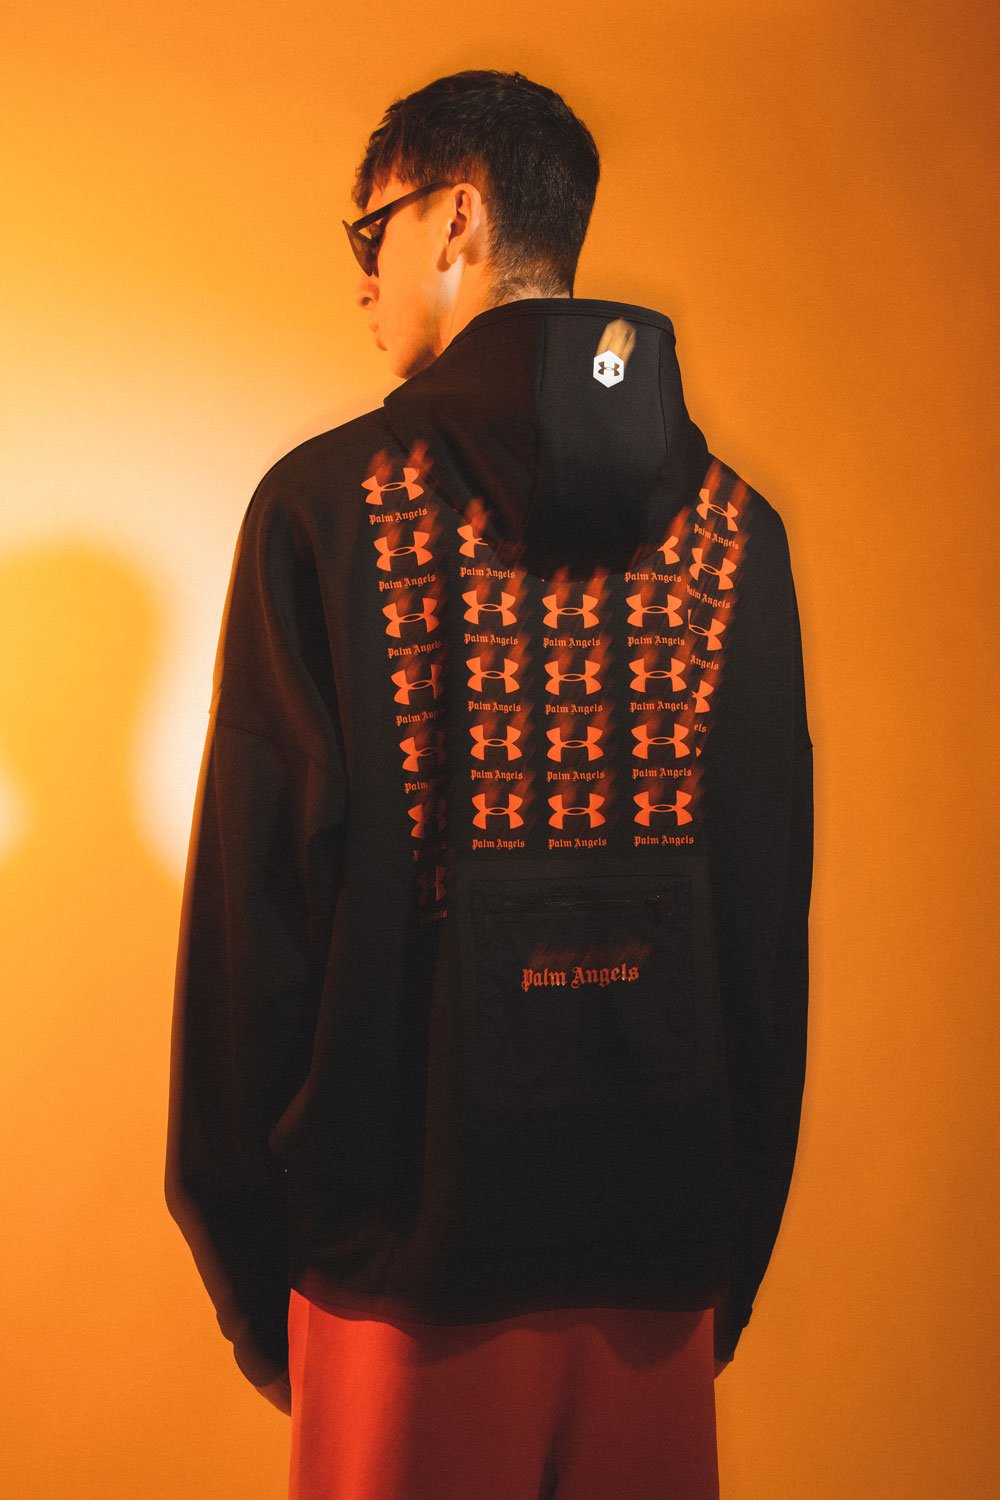 HBX on "From the Palm Angels x Under Armour collaboration, all items are made with a special material that allows faster muscle recovery. Highlighting the Loose Hoodie. See more here: https://t.co/cjt5l7v1H4